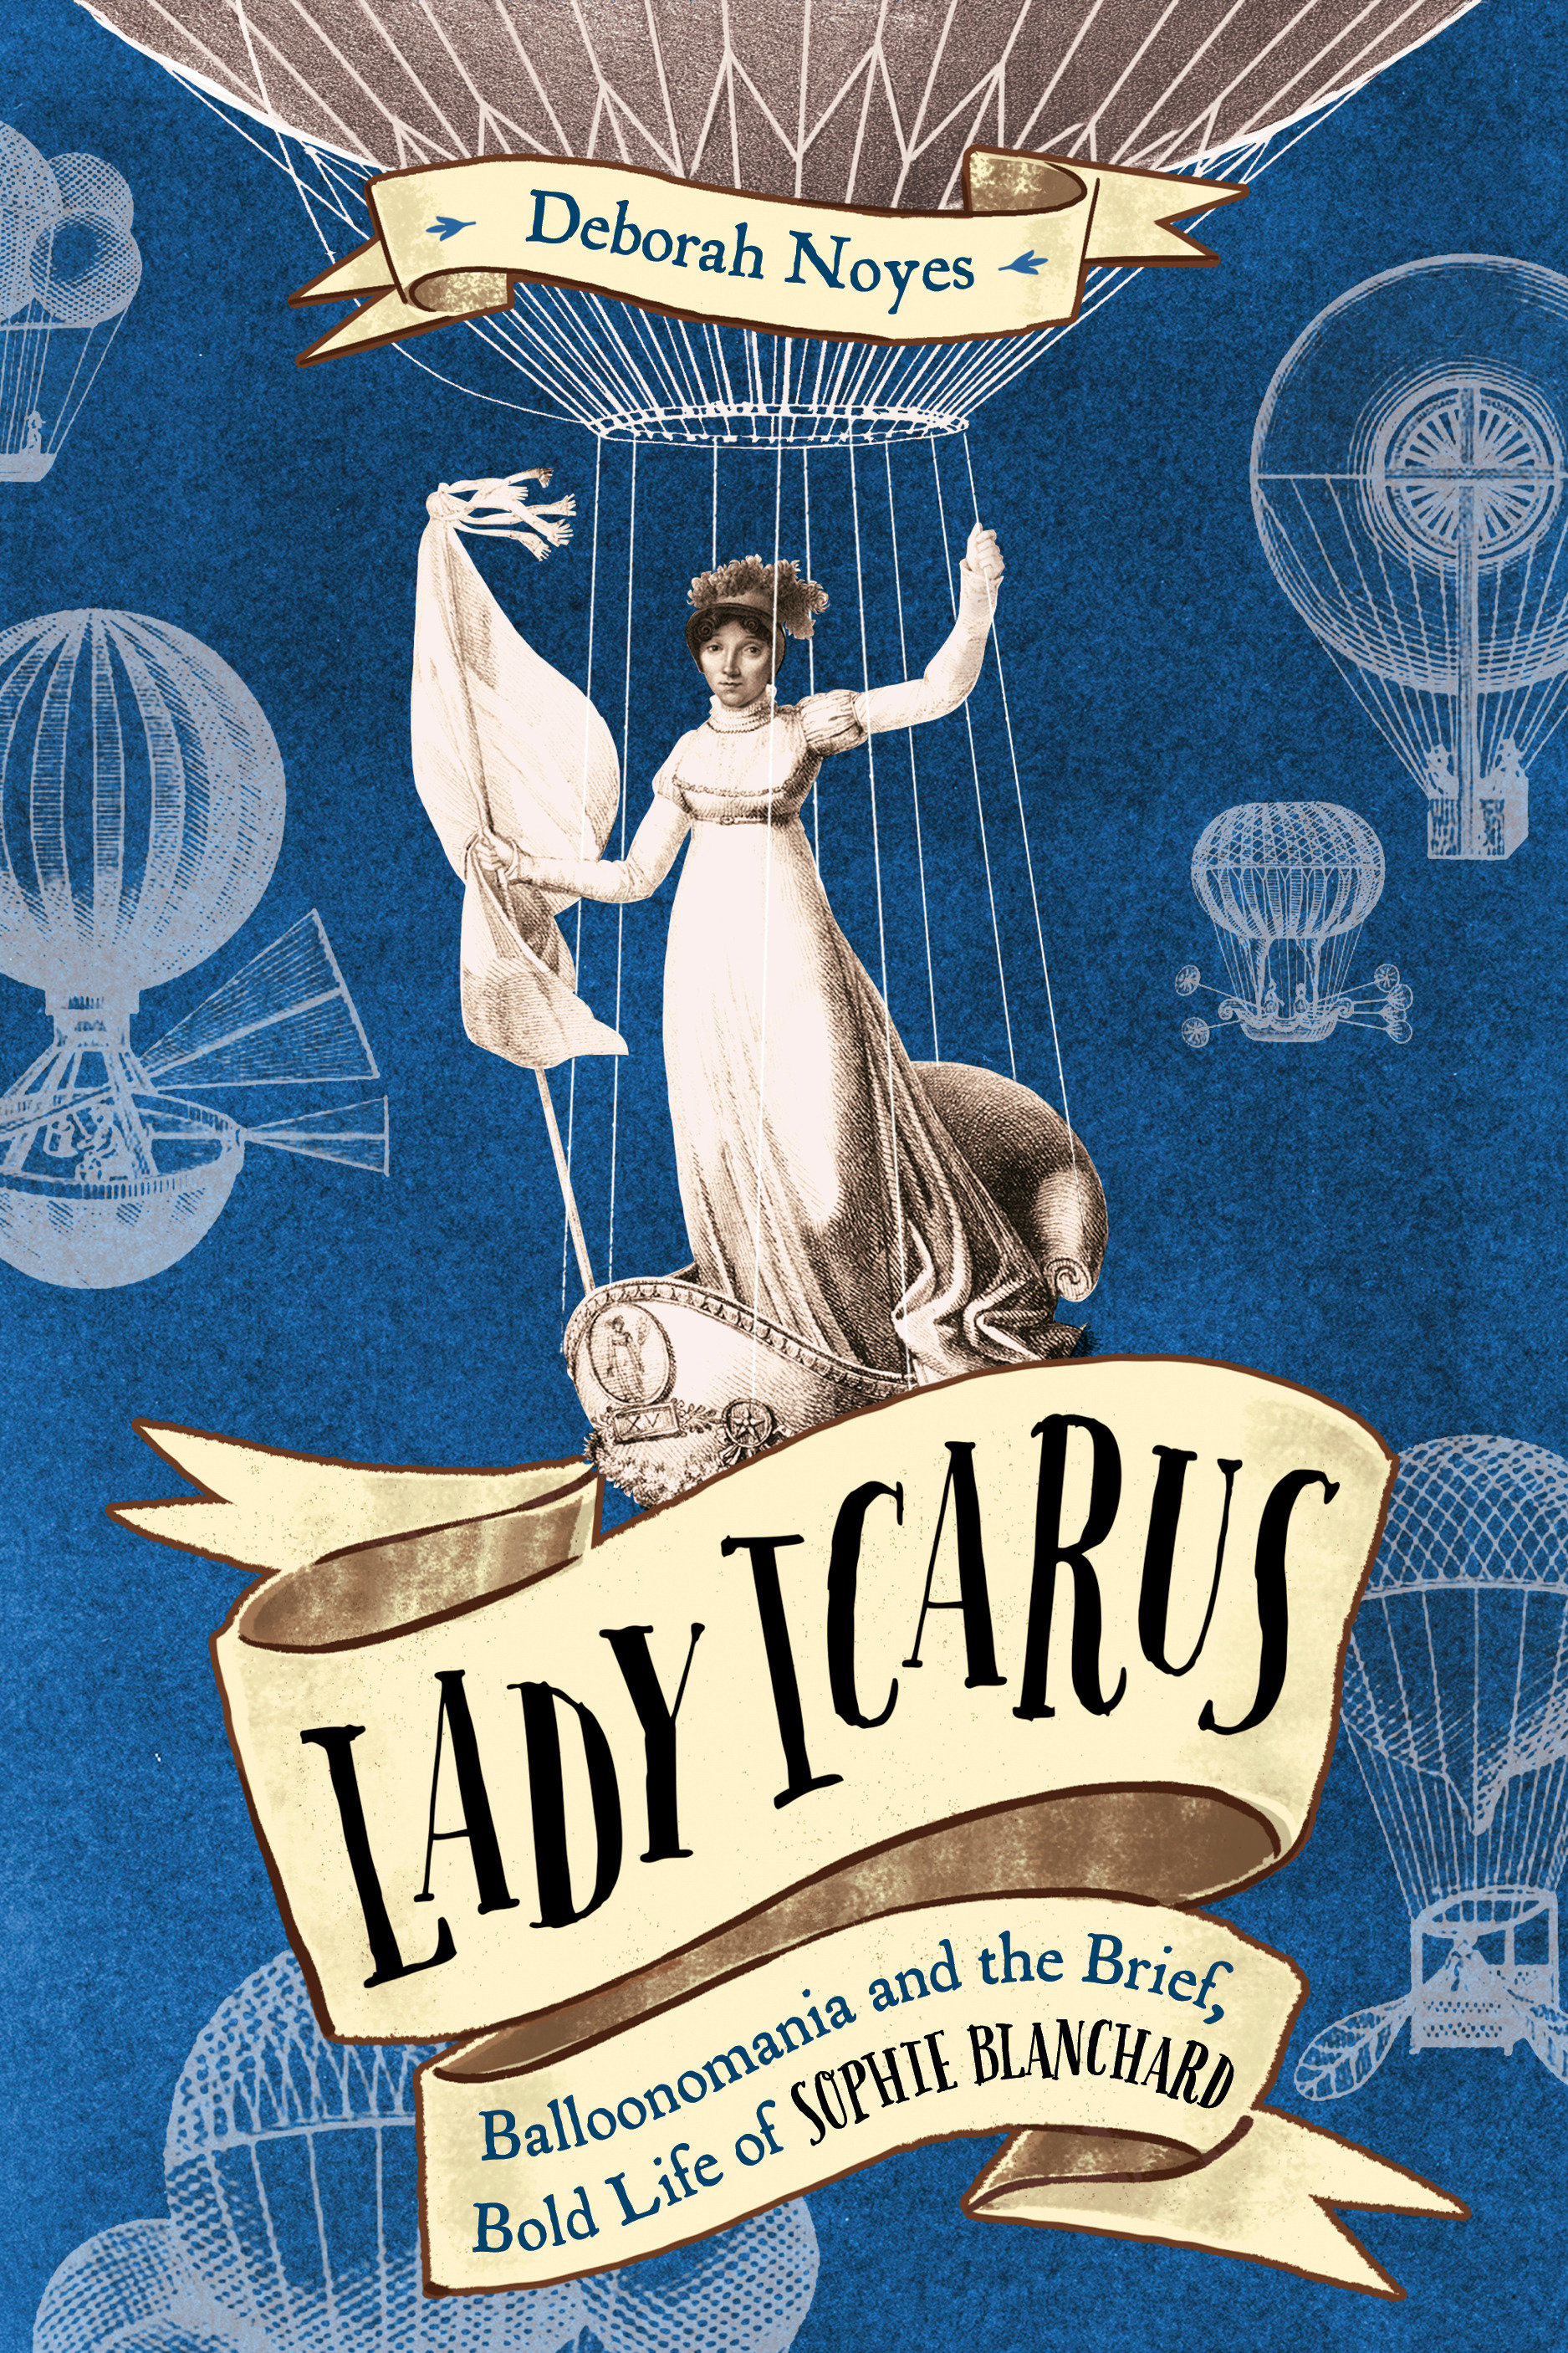 Lady Icarus (Hardcover Book)